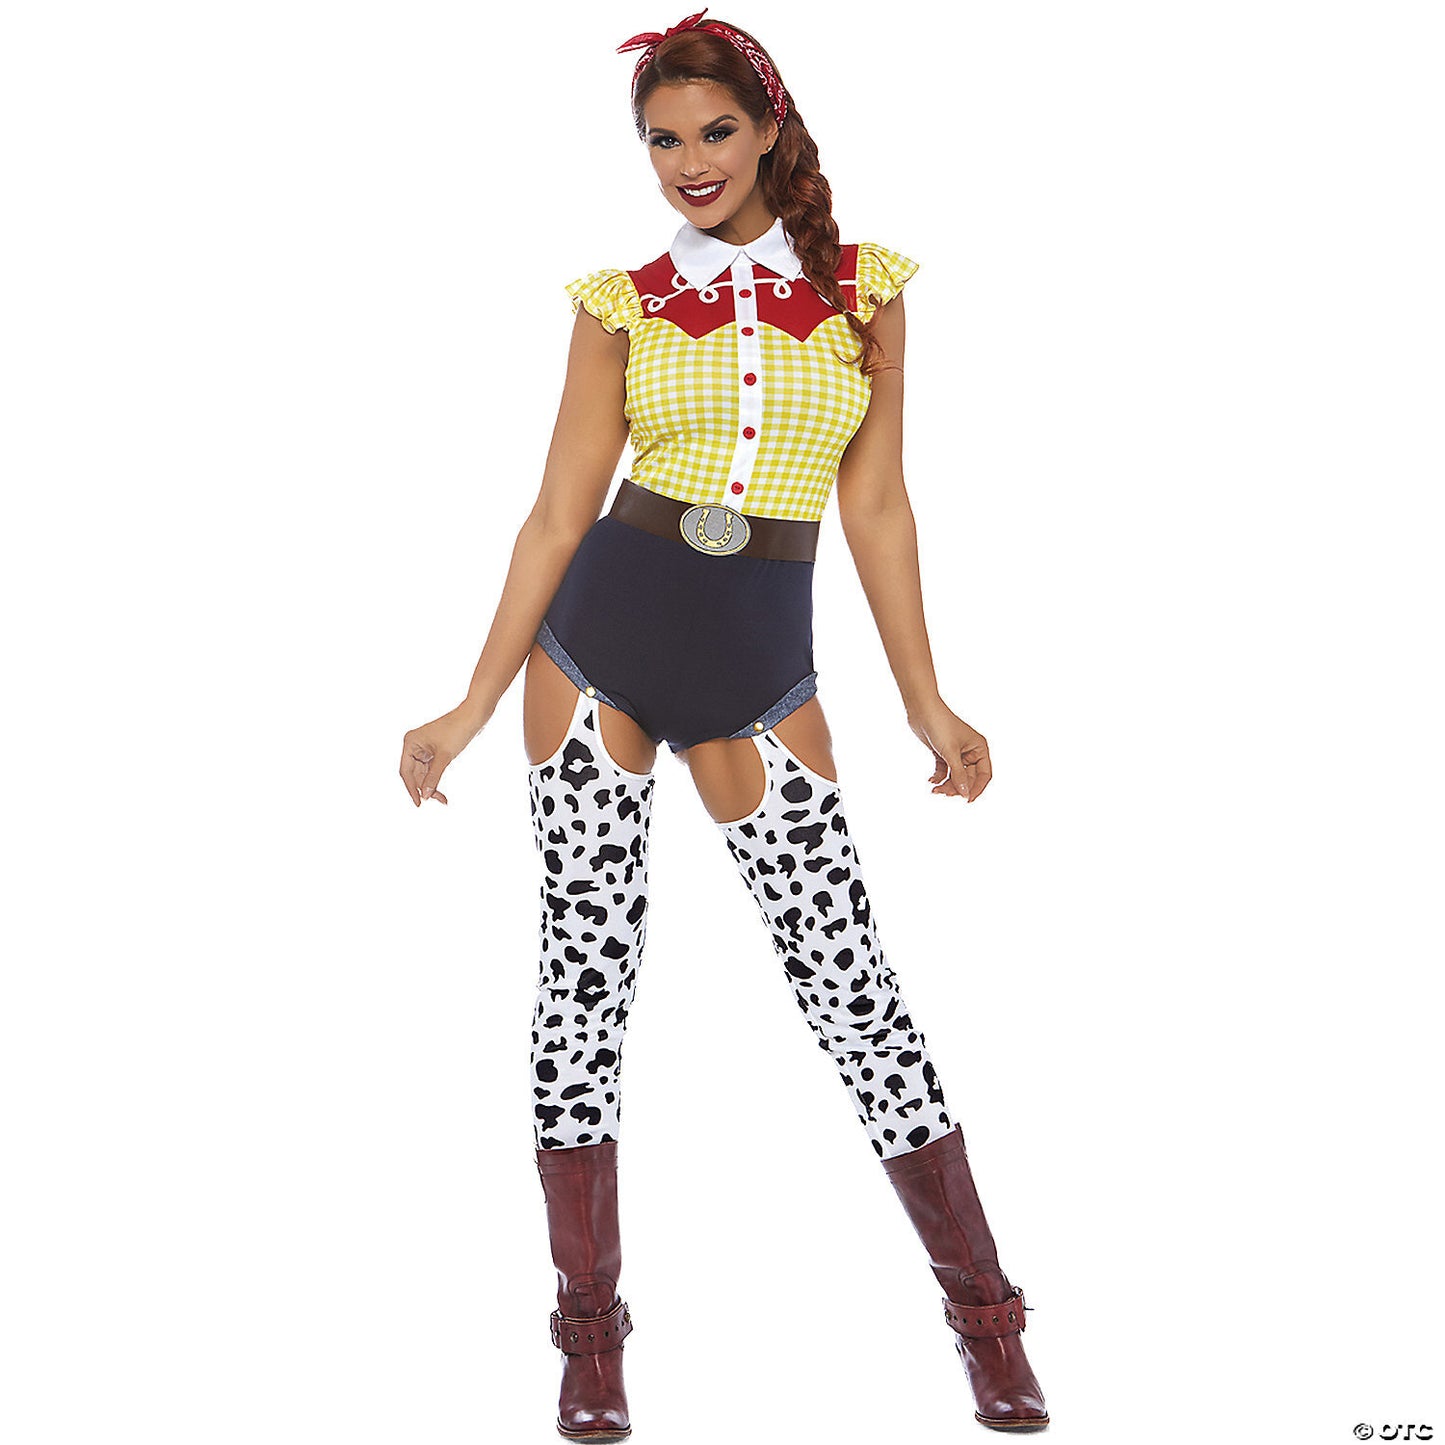 Women's giddy up cowgirl costume